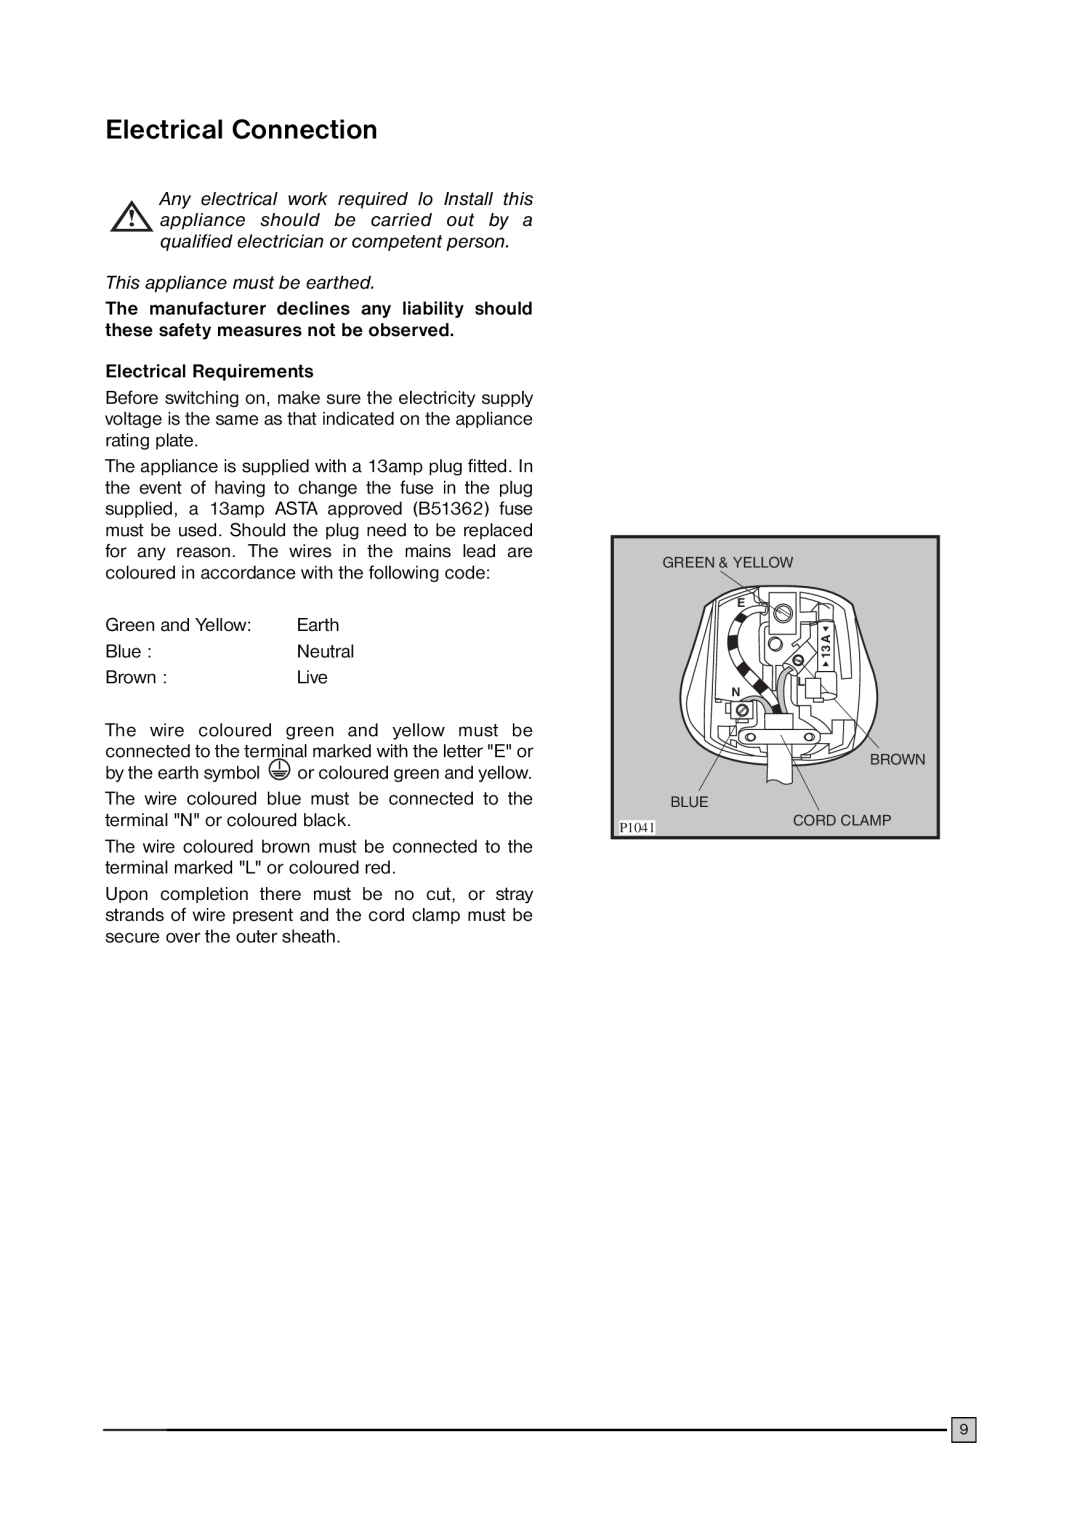 John Lewis CFI 105 installation manual Electrical Connection, Electrical Requirements 